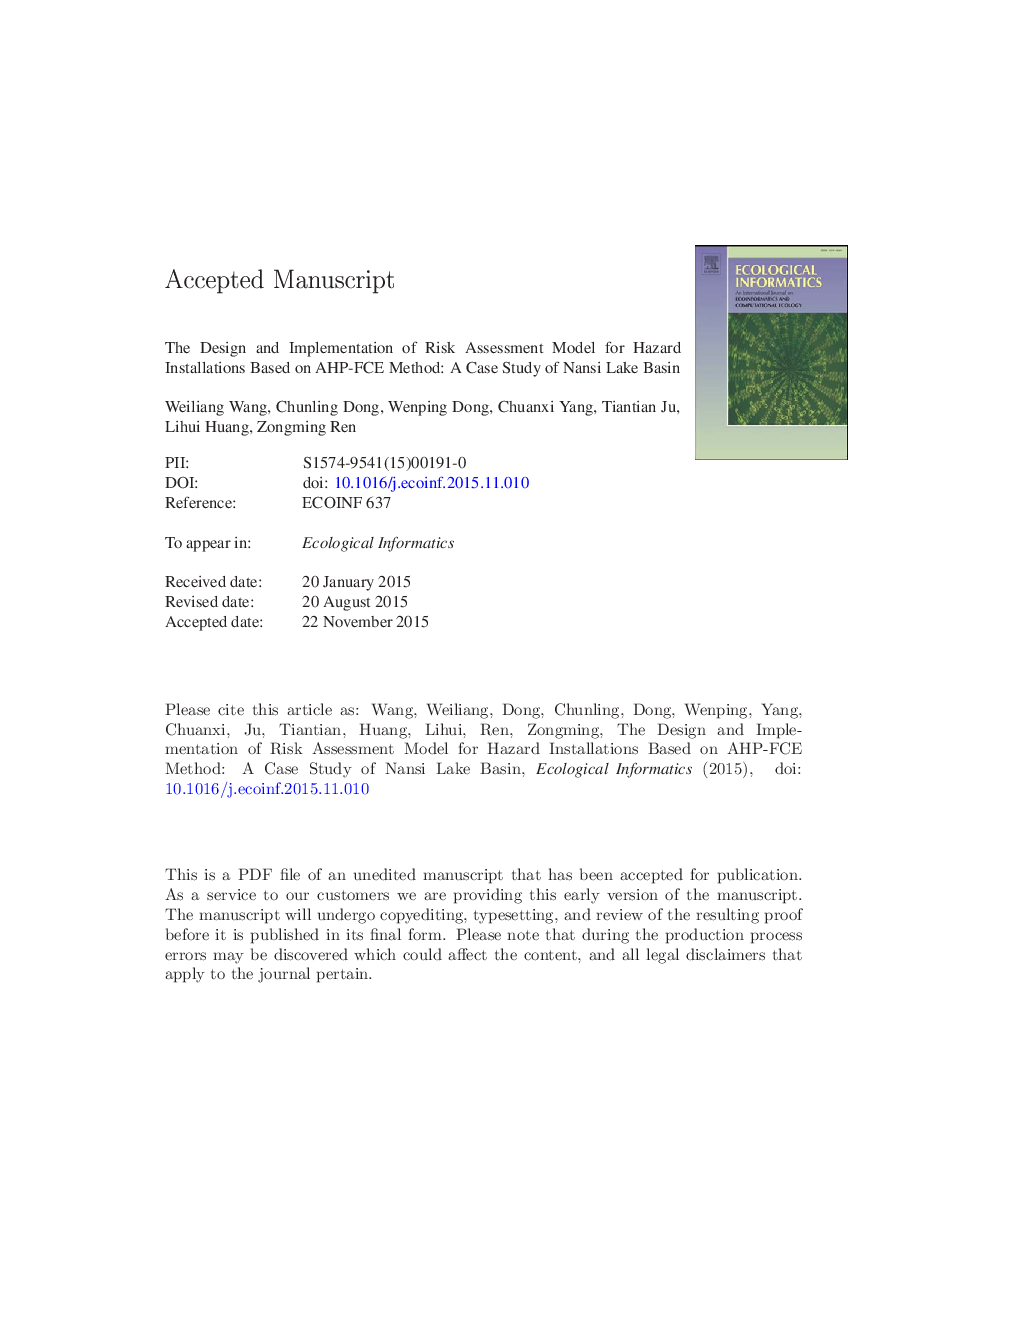 The design and implementation of risk assessment model for hazard installations based on AHP-FCE method: A case study of Nansi Lake Basin